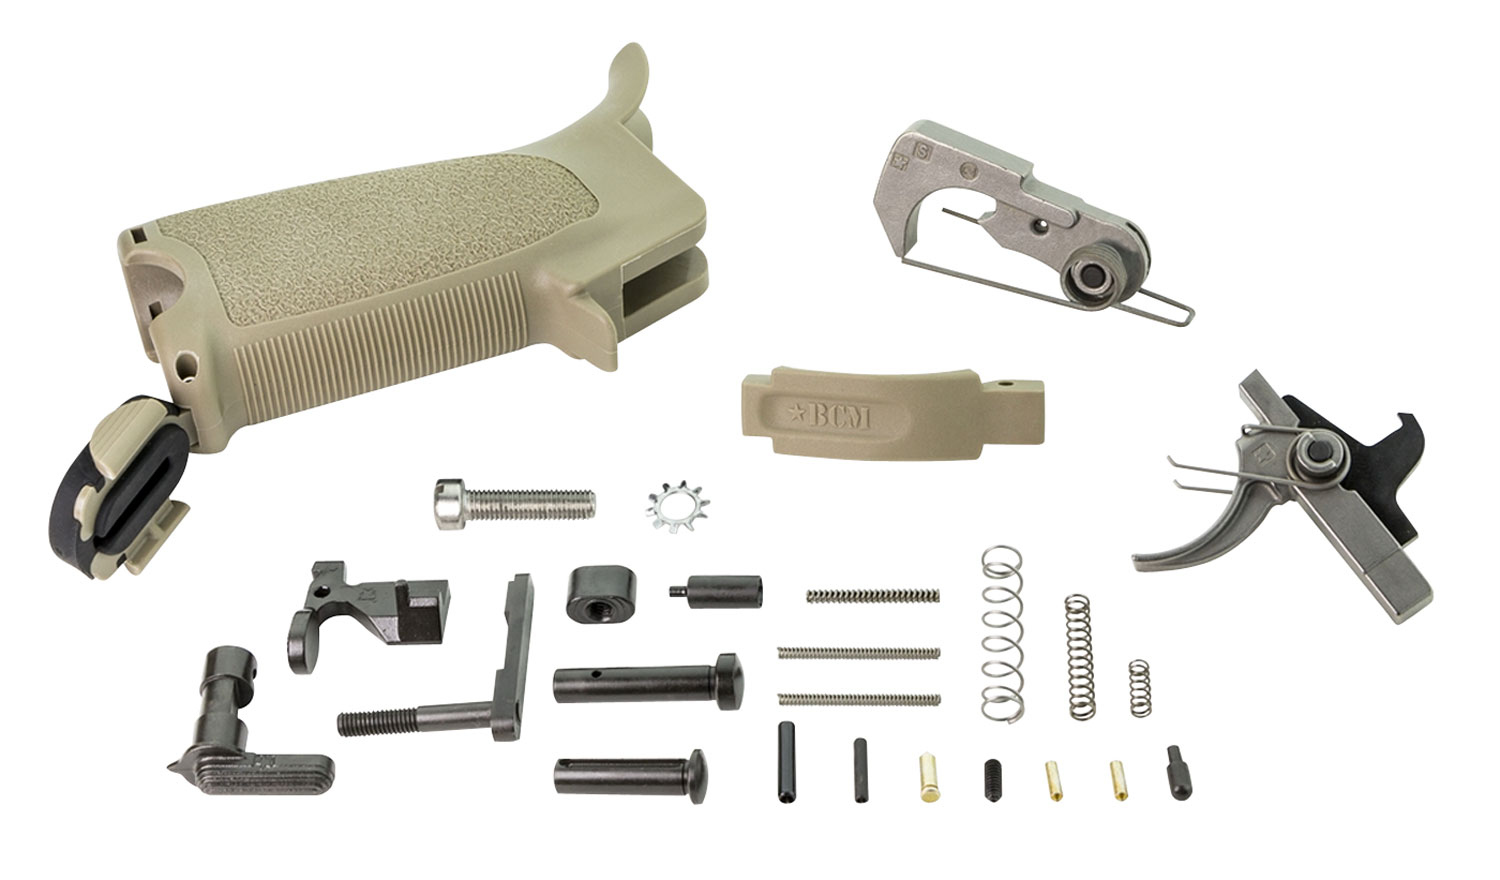 BCM PARTS KIT LOWER FDE FOR AR-15